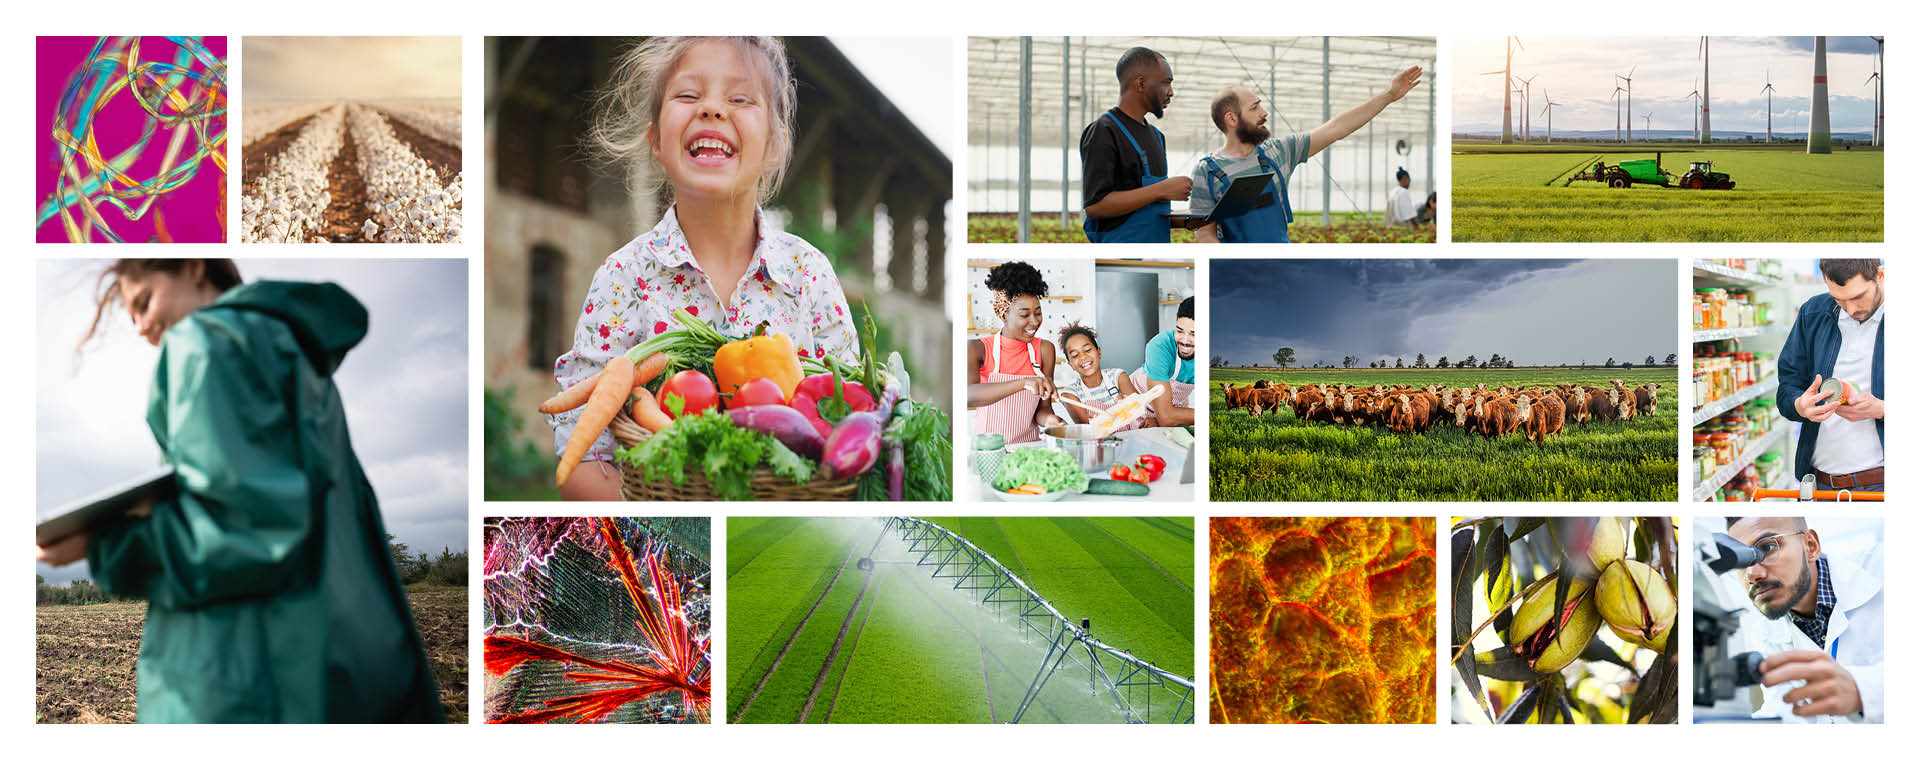 Collage image featuring cellular-level photography, agricultural images, and people holding fresh produce.